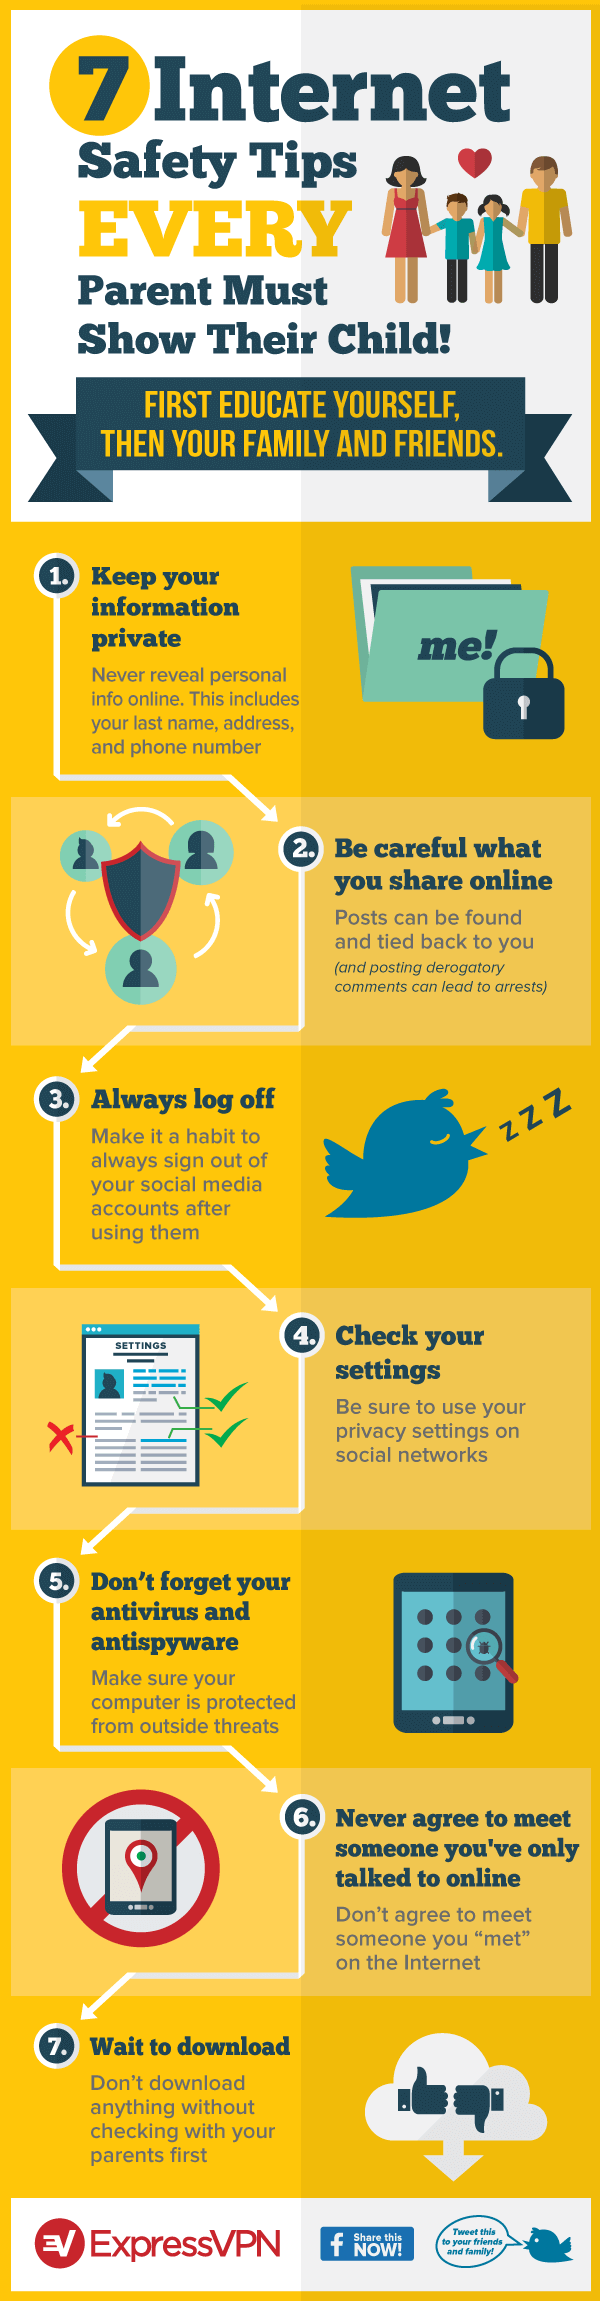 7 #Internet Safety Tips Every Parent Must Show Their Child! [infographic]